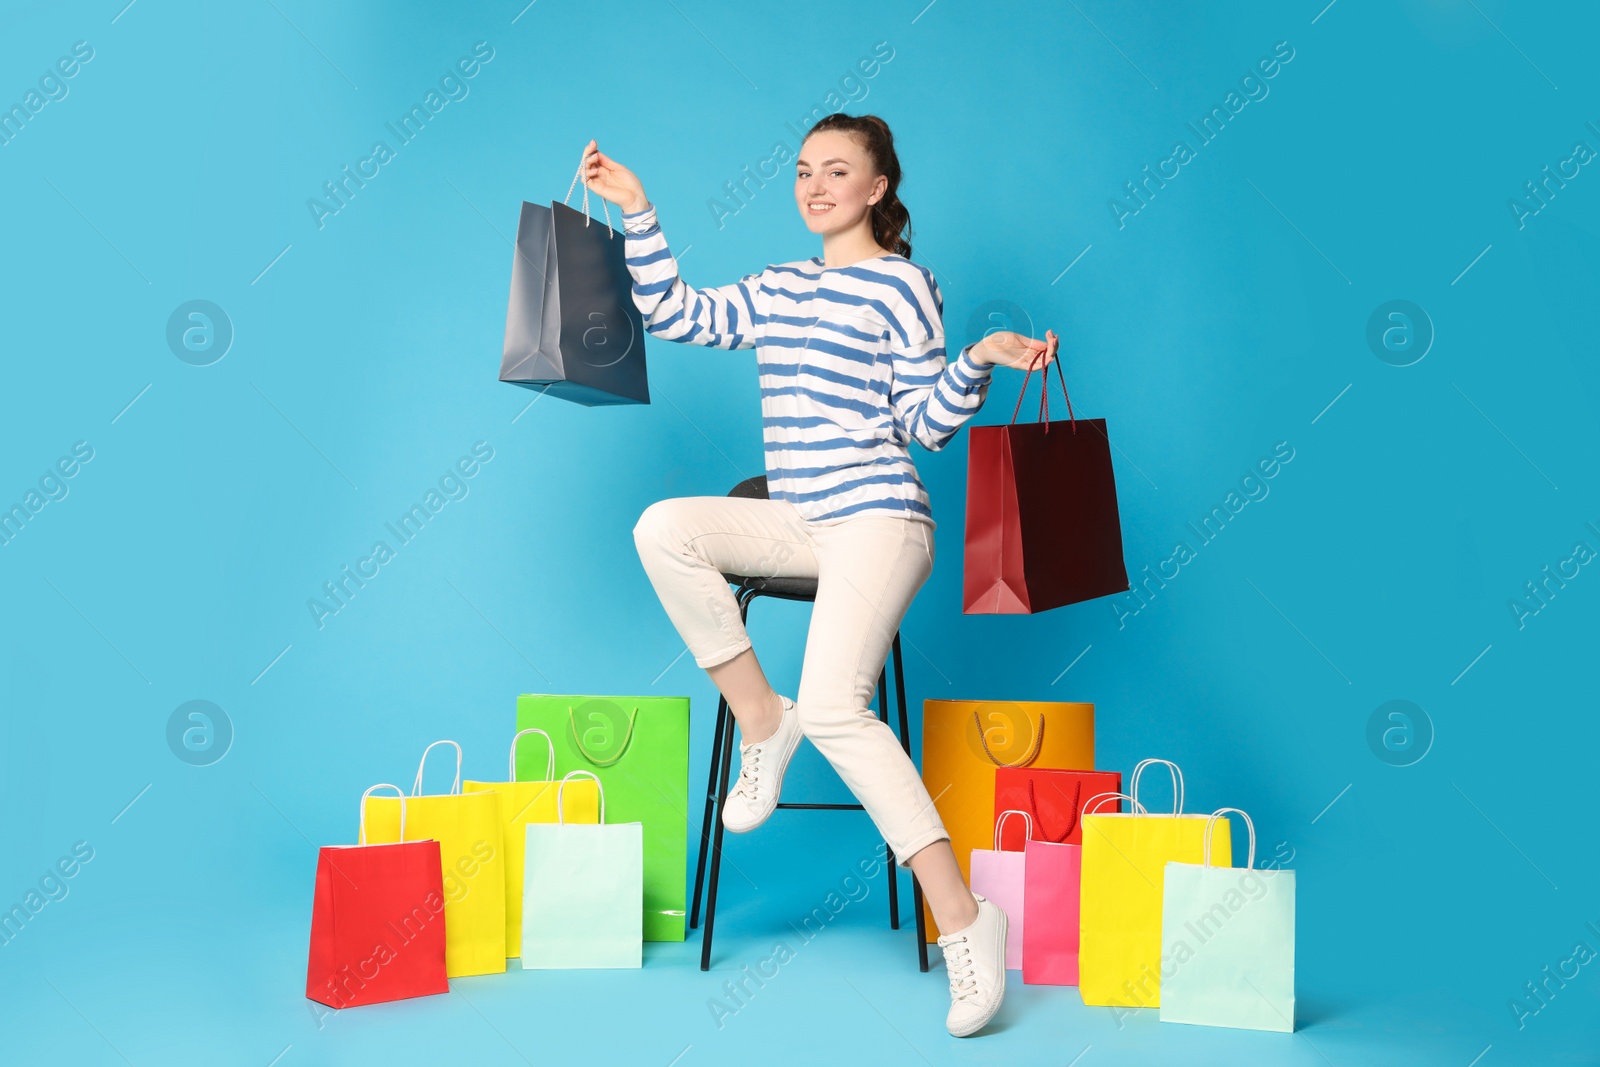 Photo of Happy woman holding colorful shopping bags on stool against light blue background